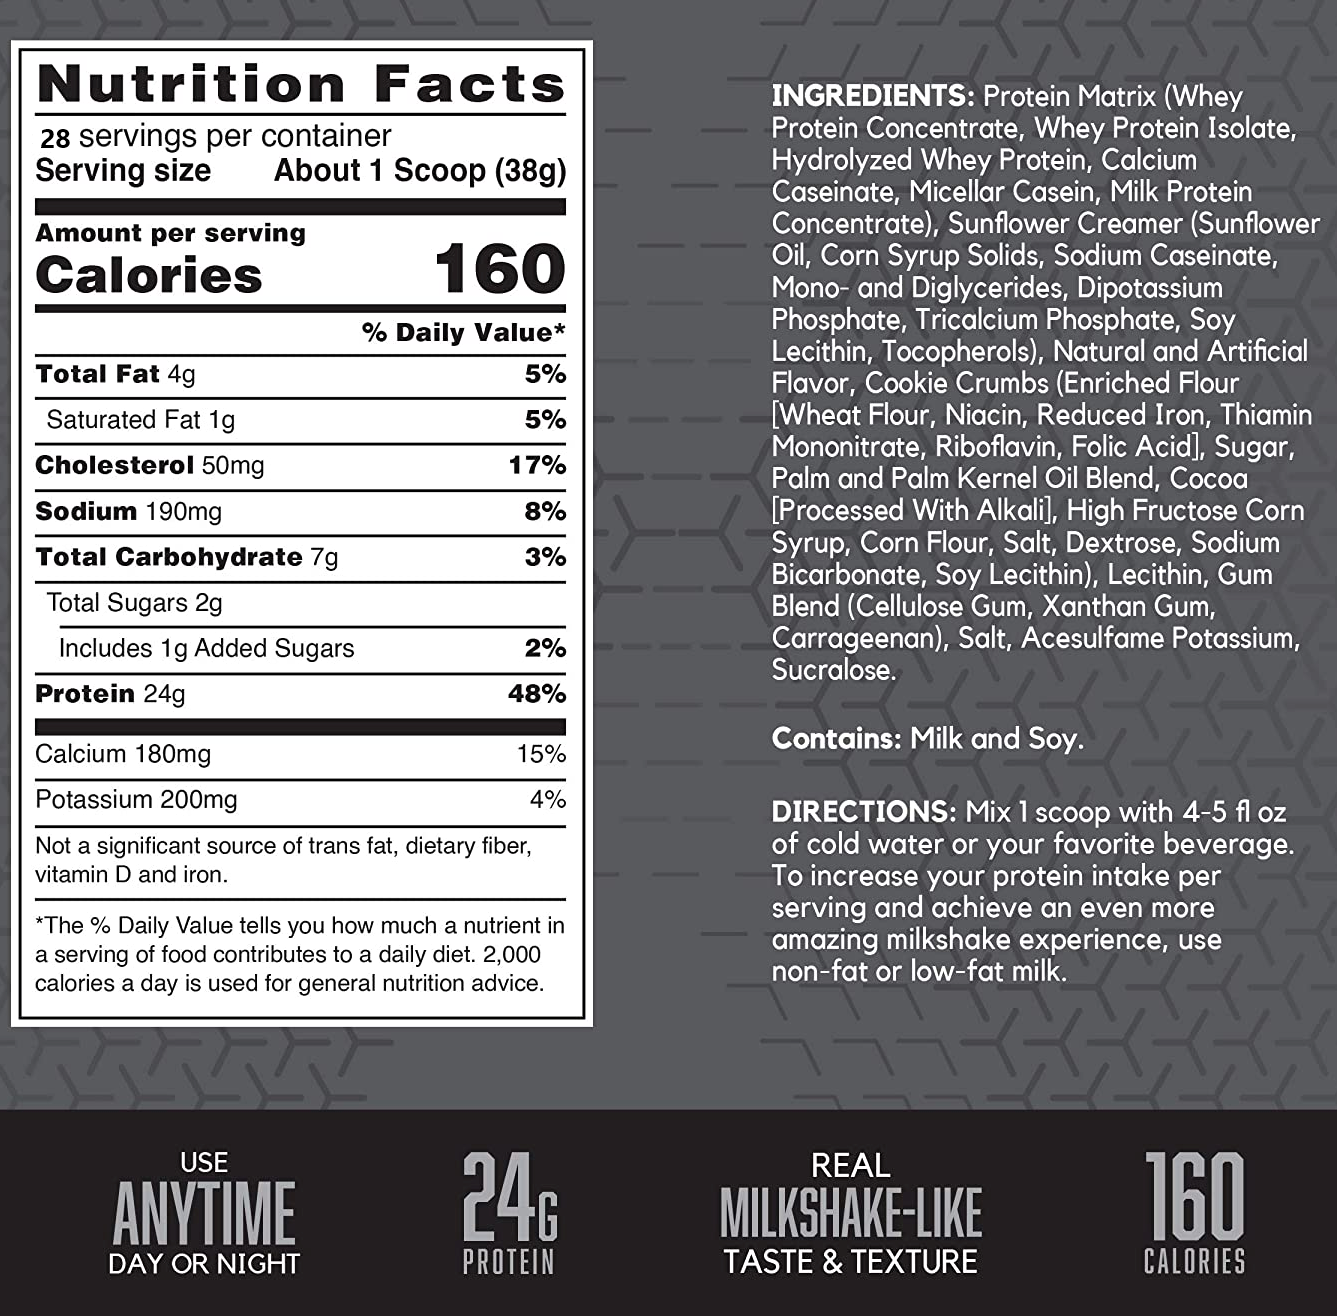 Nutrition facts for a protein shake with 24g protein and 160 calories per serving. Contains milk and soy as main ingredients.